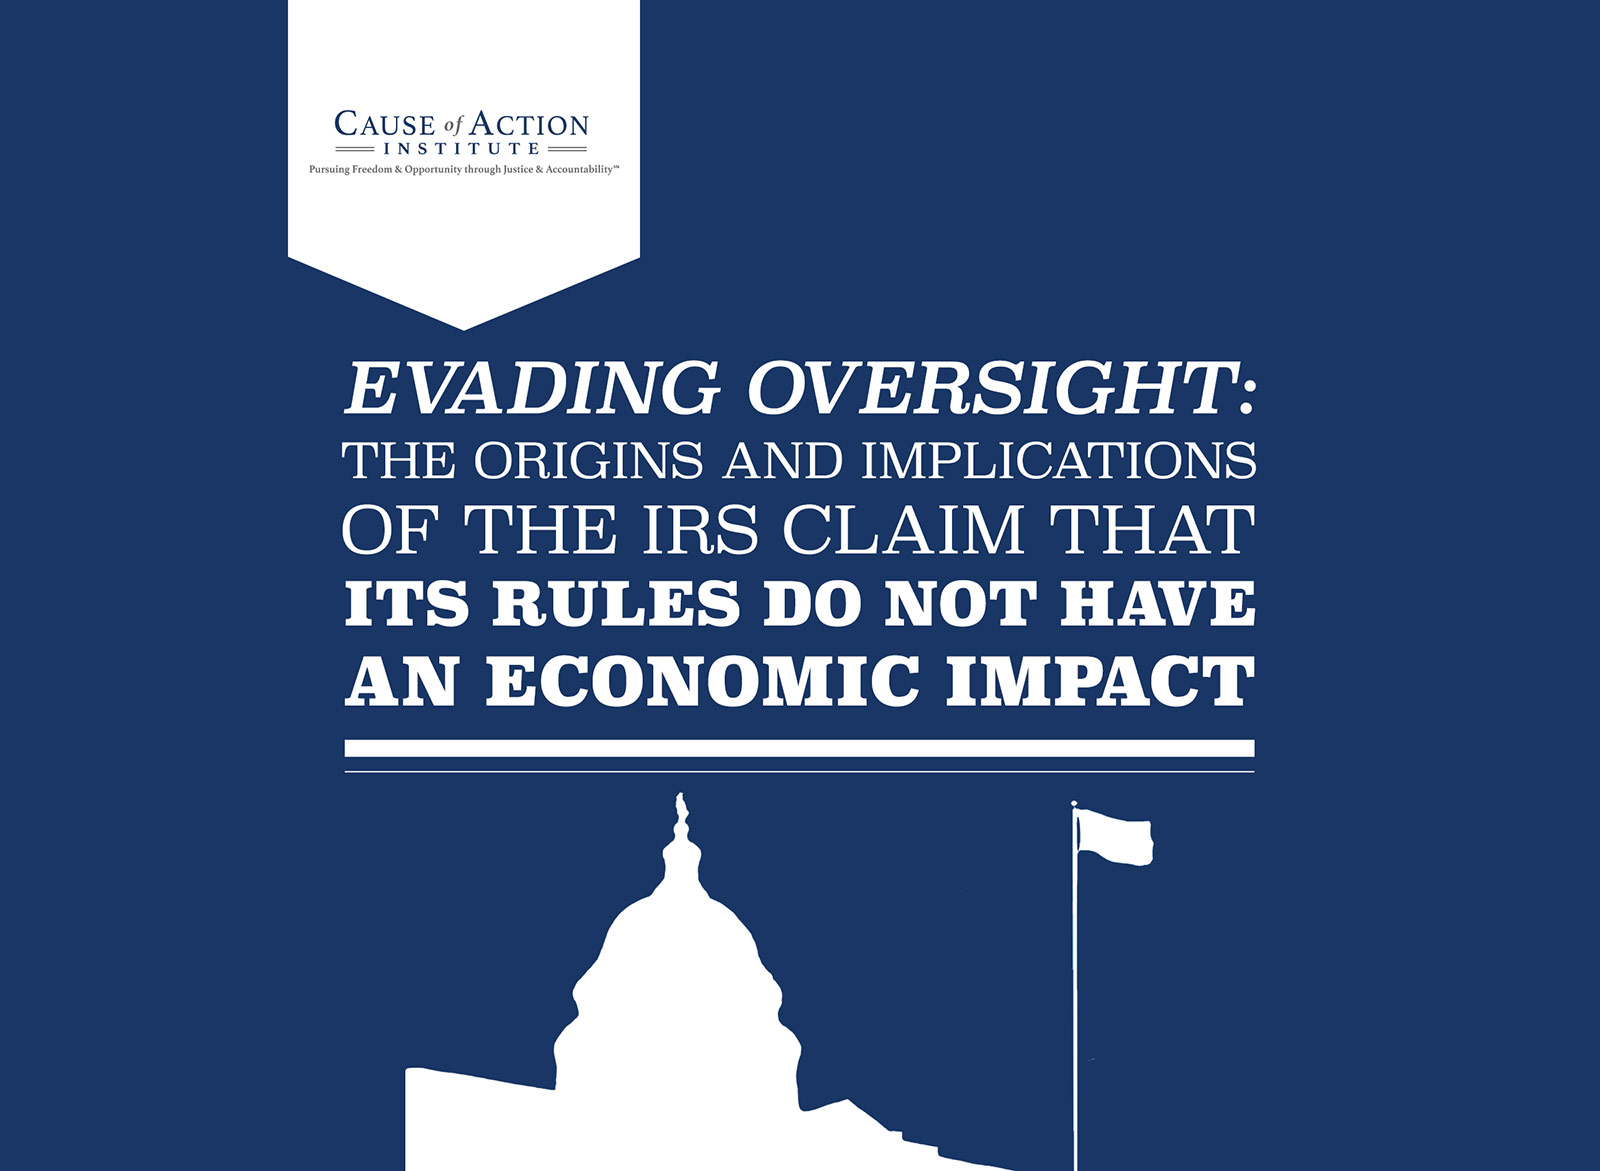 Evading Oversight: The Origins and Implications of the IRS Claim That Its Rules Do Not Have an Economic Impact